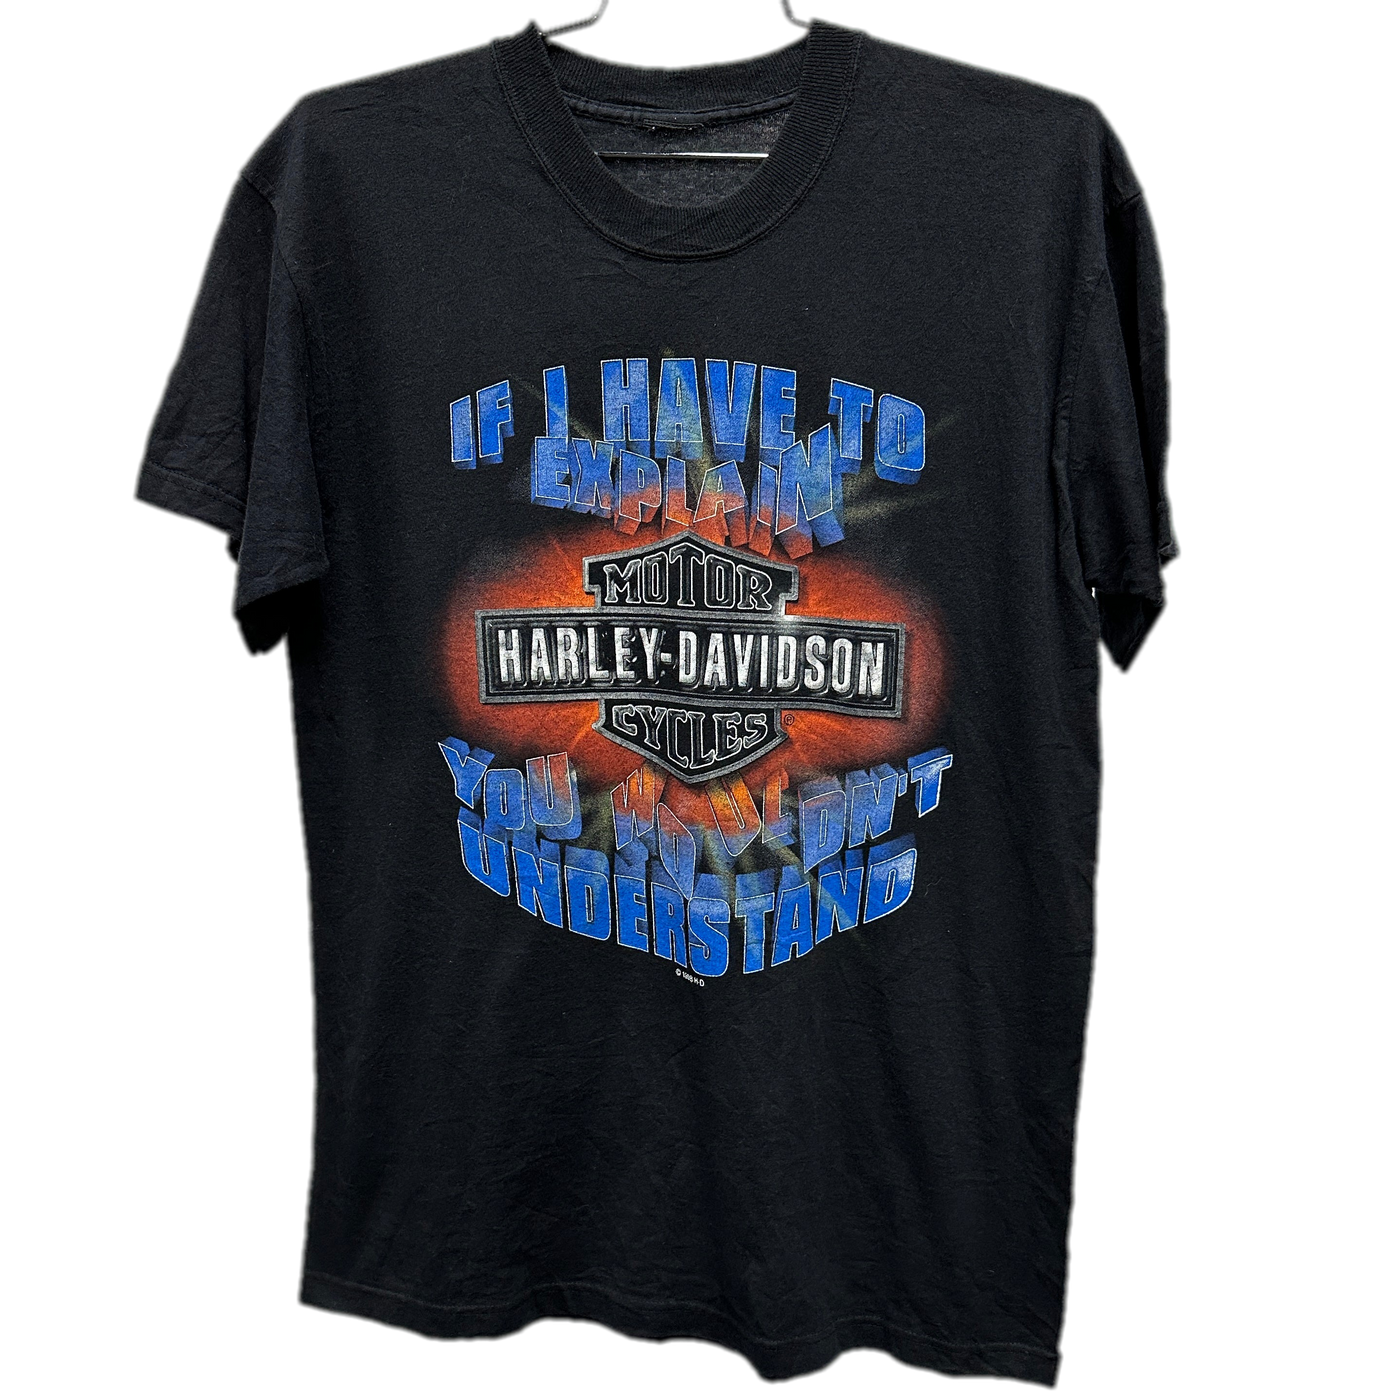 '98 "If I Have To Explain, You Wouldn't Understand" Black Harley Davidson T-shirt sz L